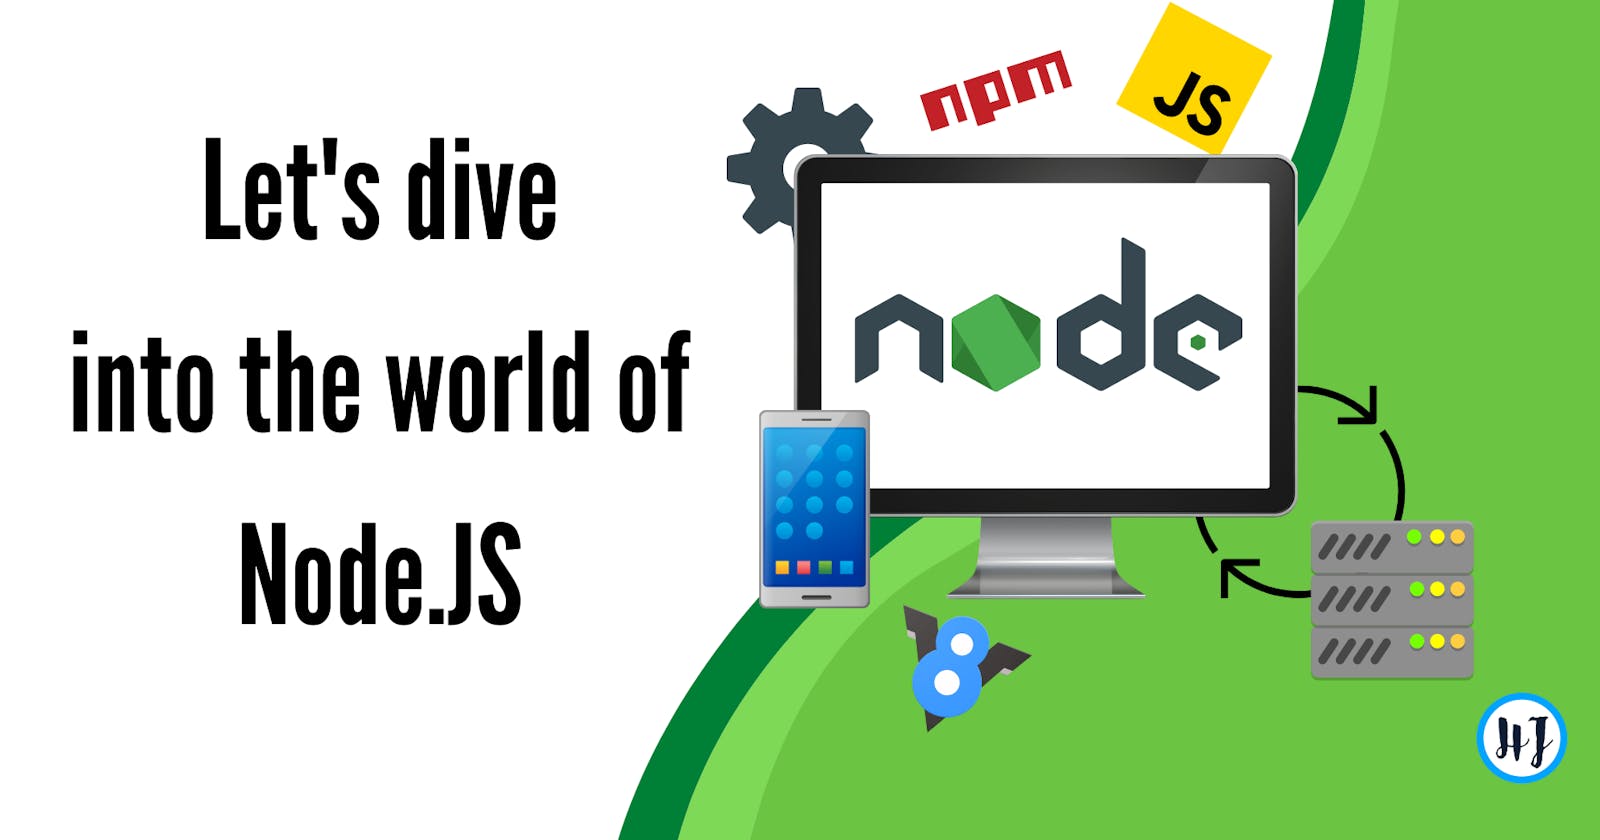 Let's dive into the world of Node.JS !!!